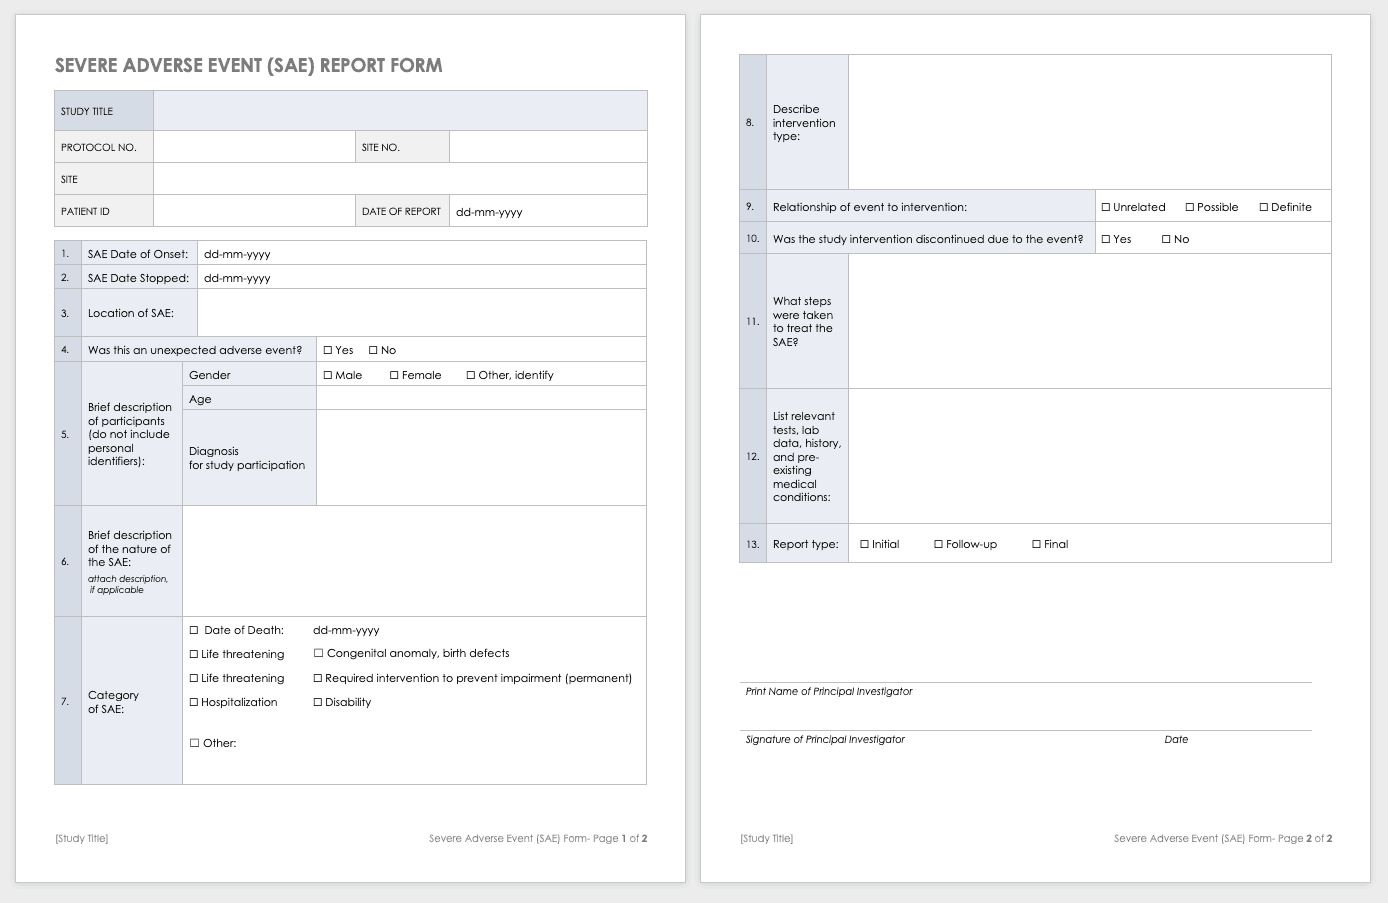 Free Clinical Trial Templates | Smartsheet With Case Report Form Template Clinical Trials